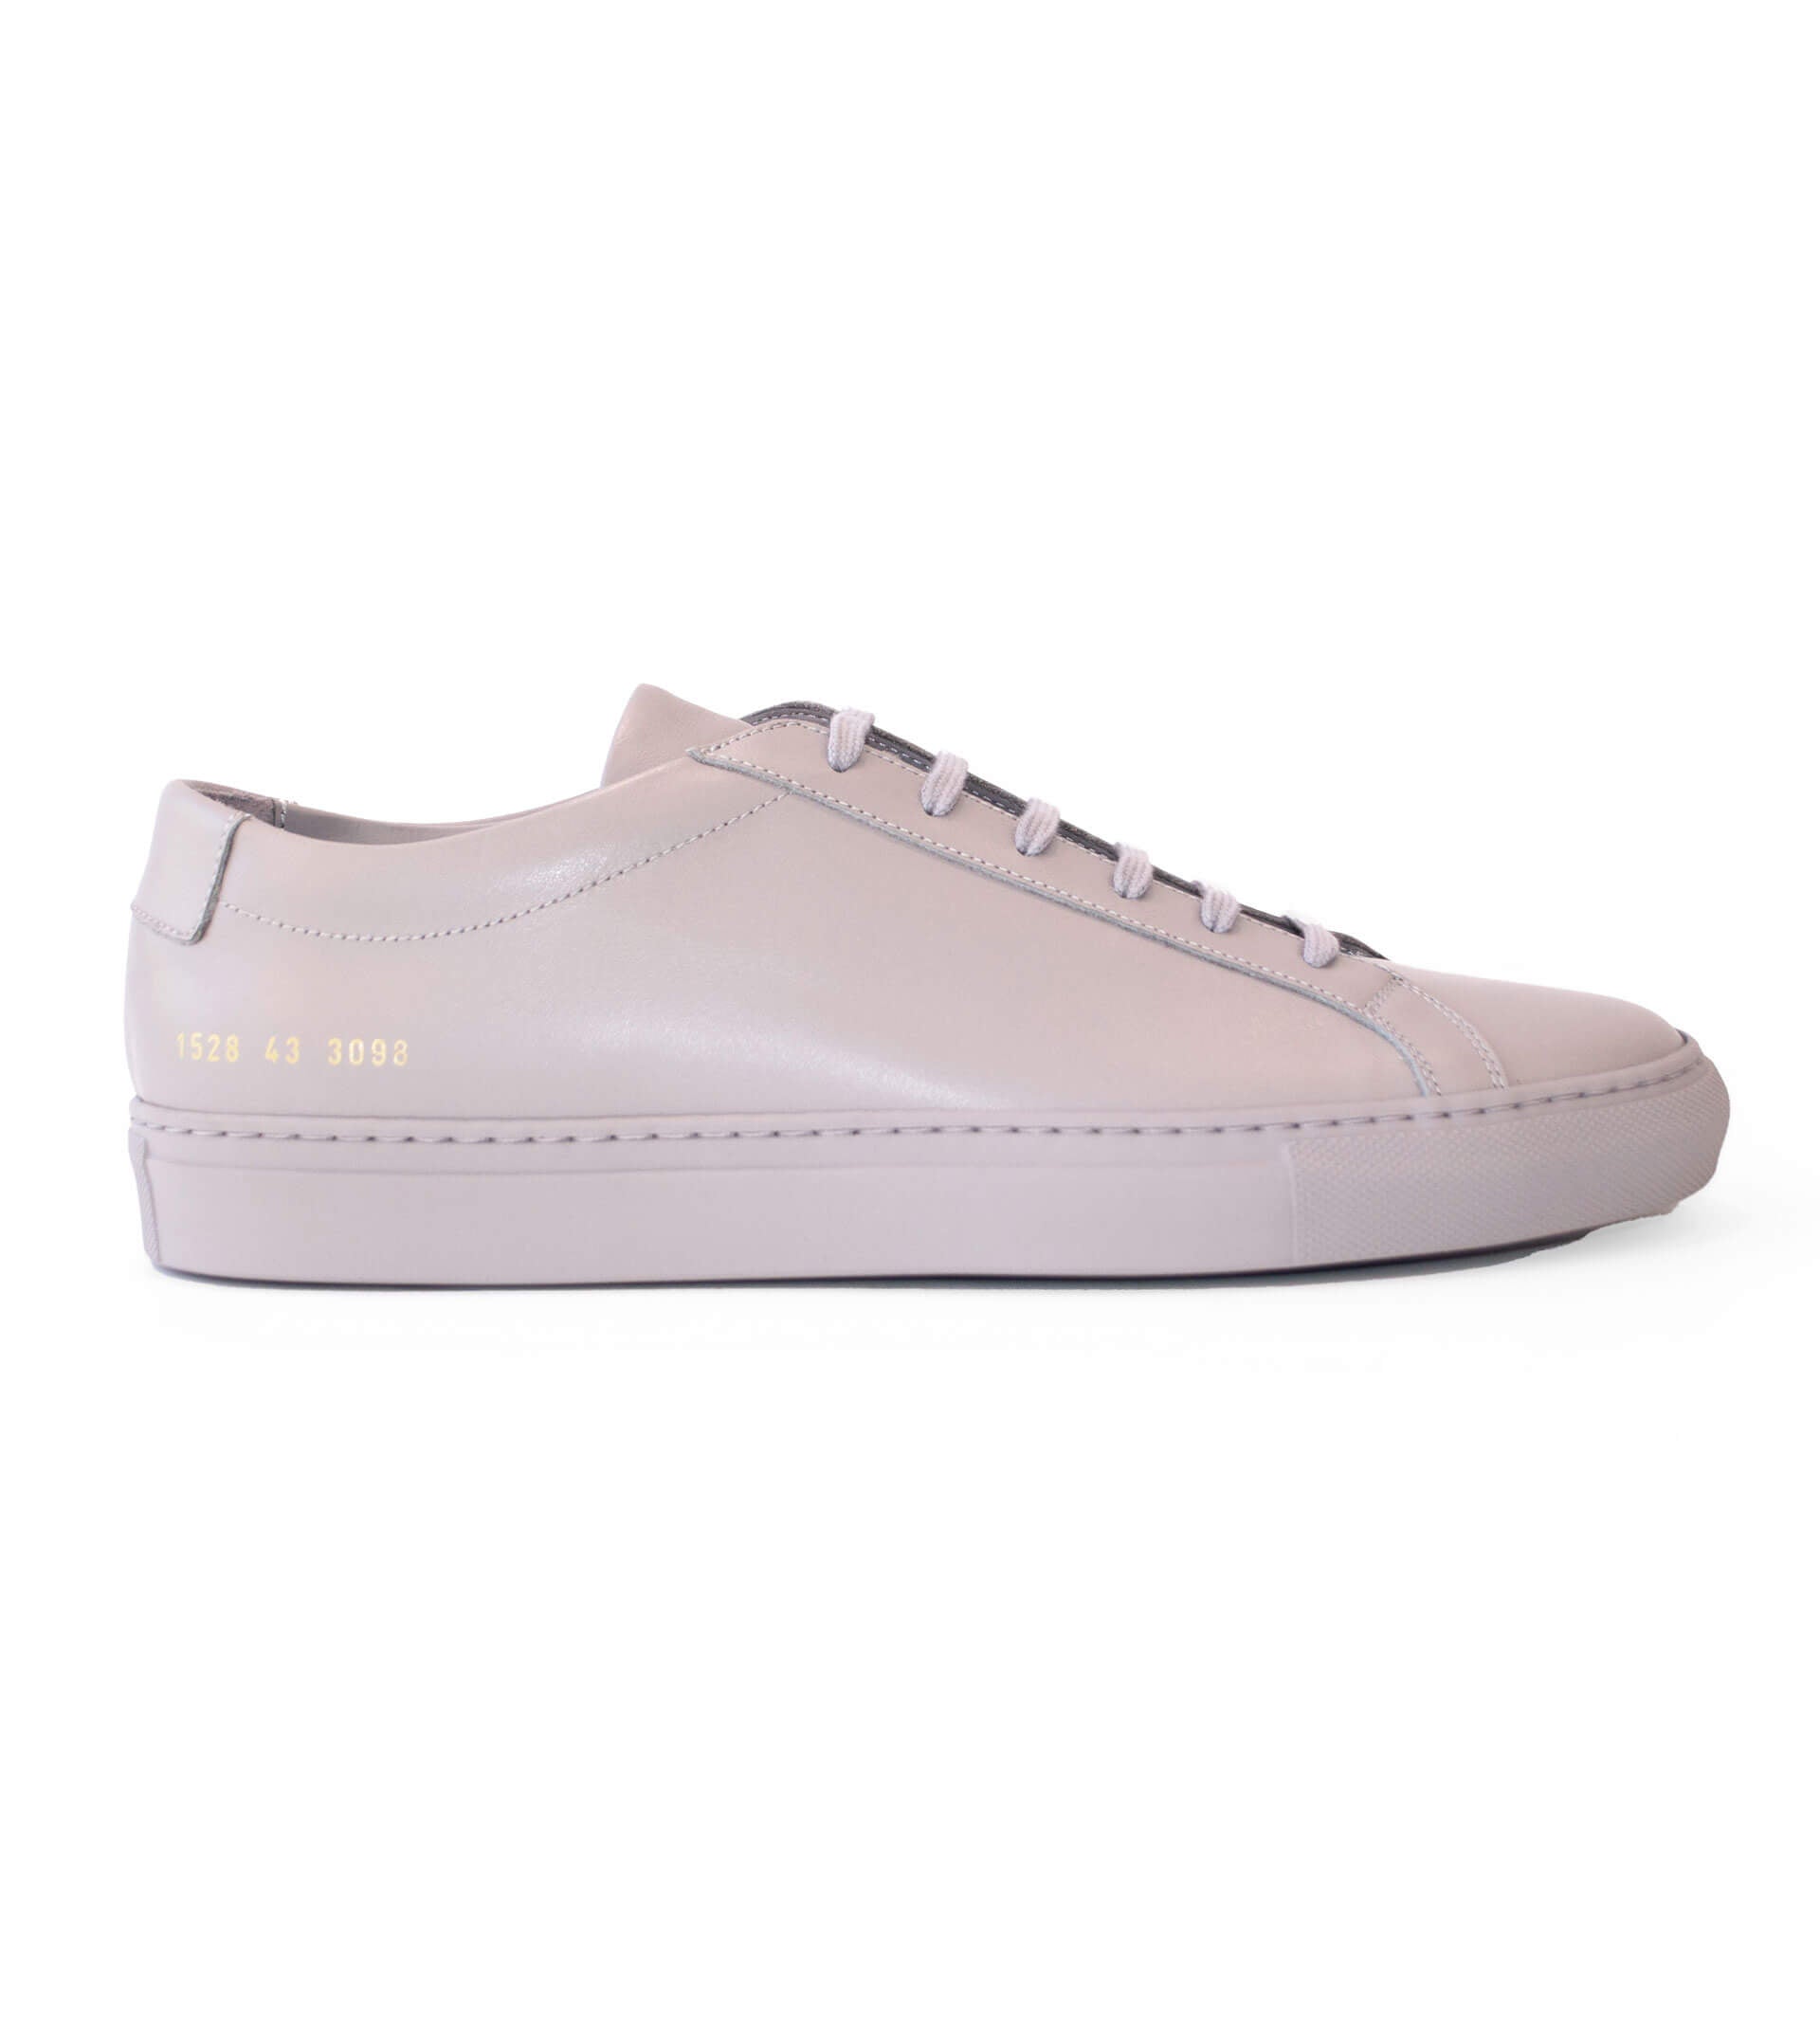 COMMON PROJECTS Original Achilles Leather Sneaker